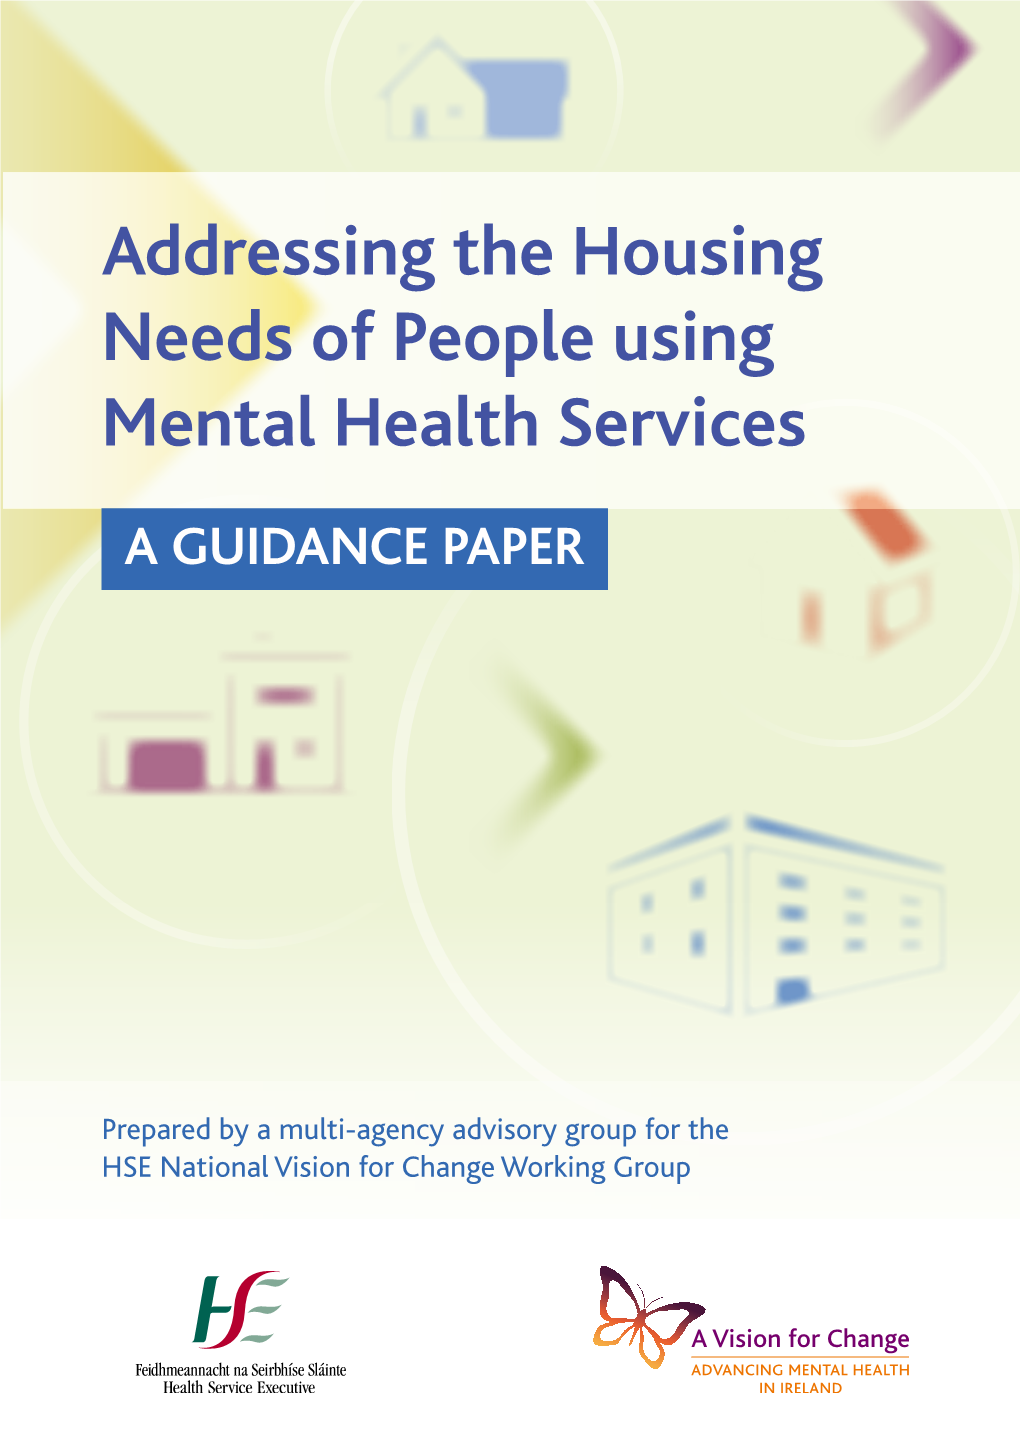 Addressing the Housing Needs of People Using Mental Health Services